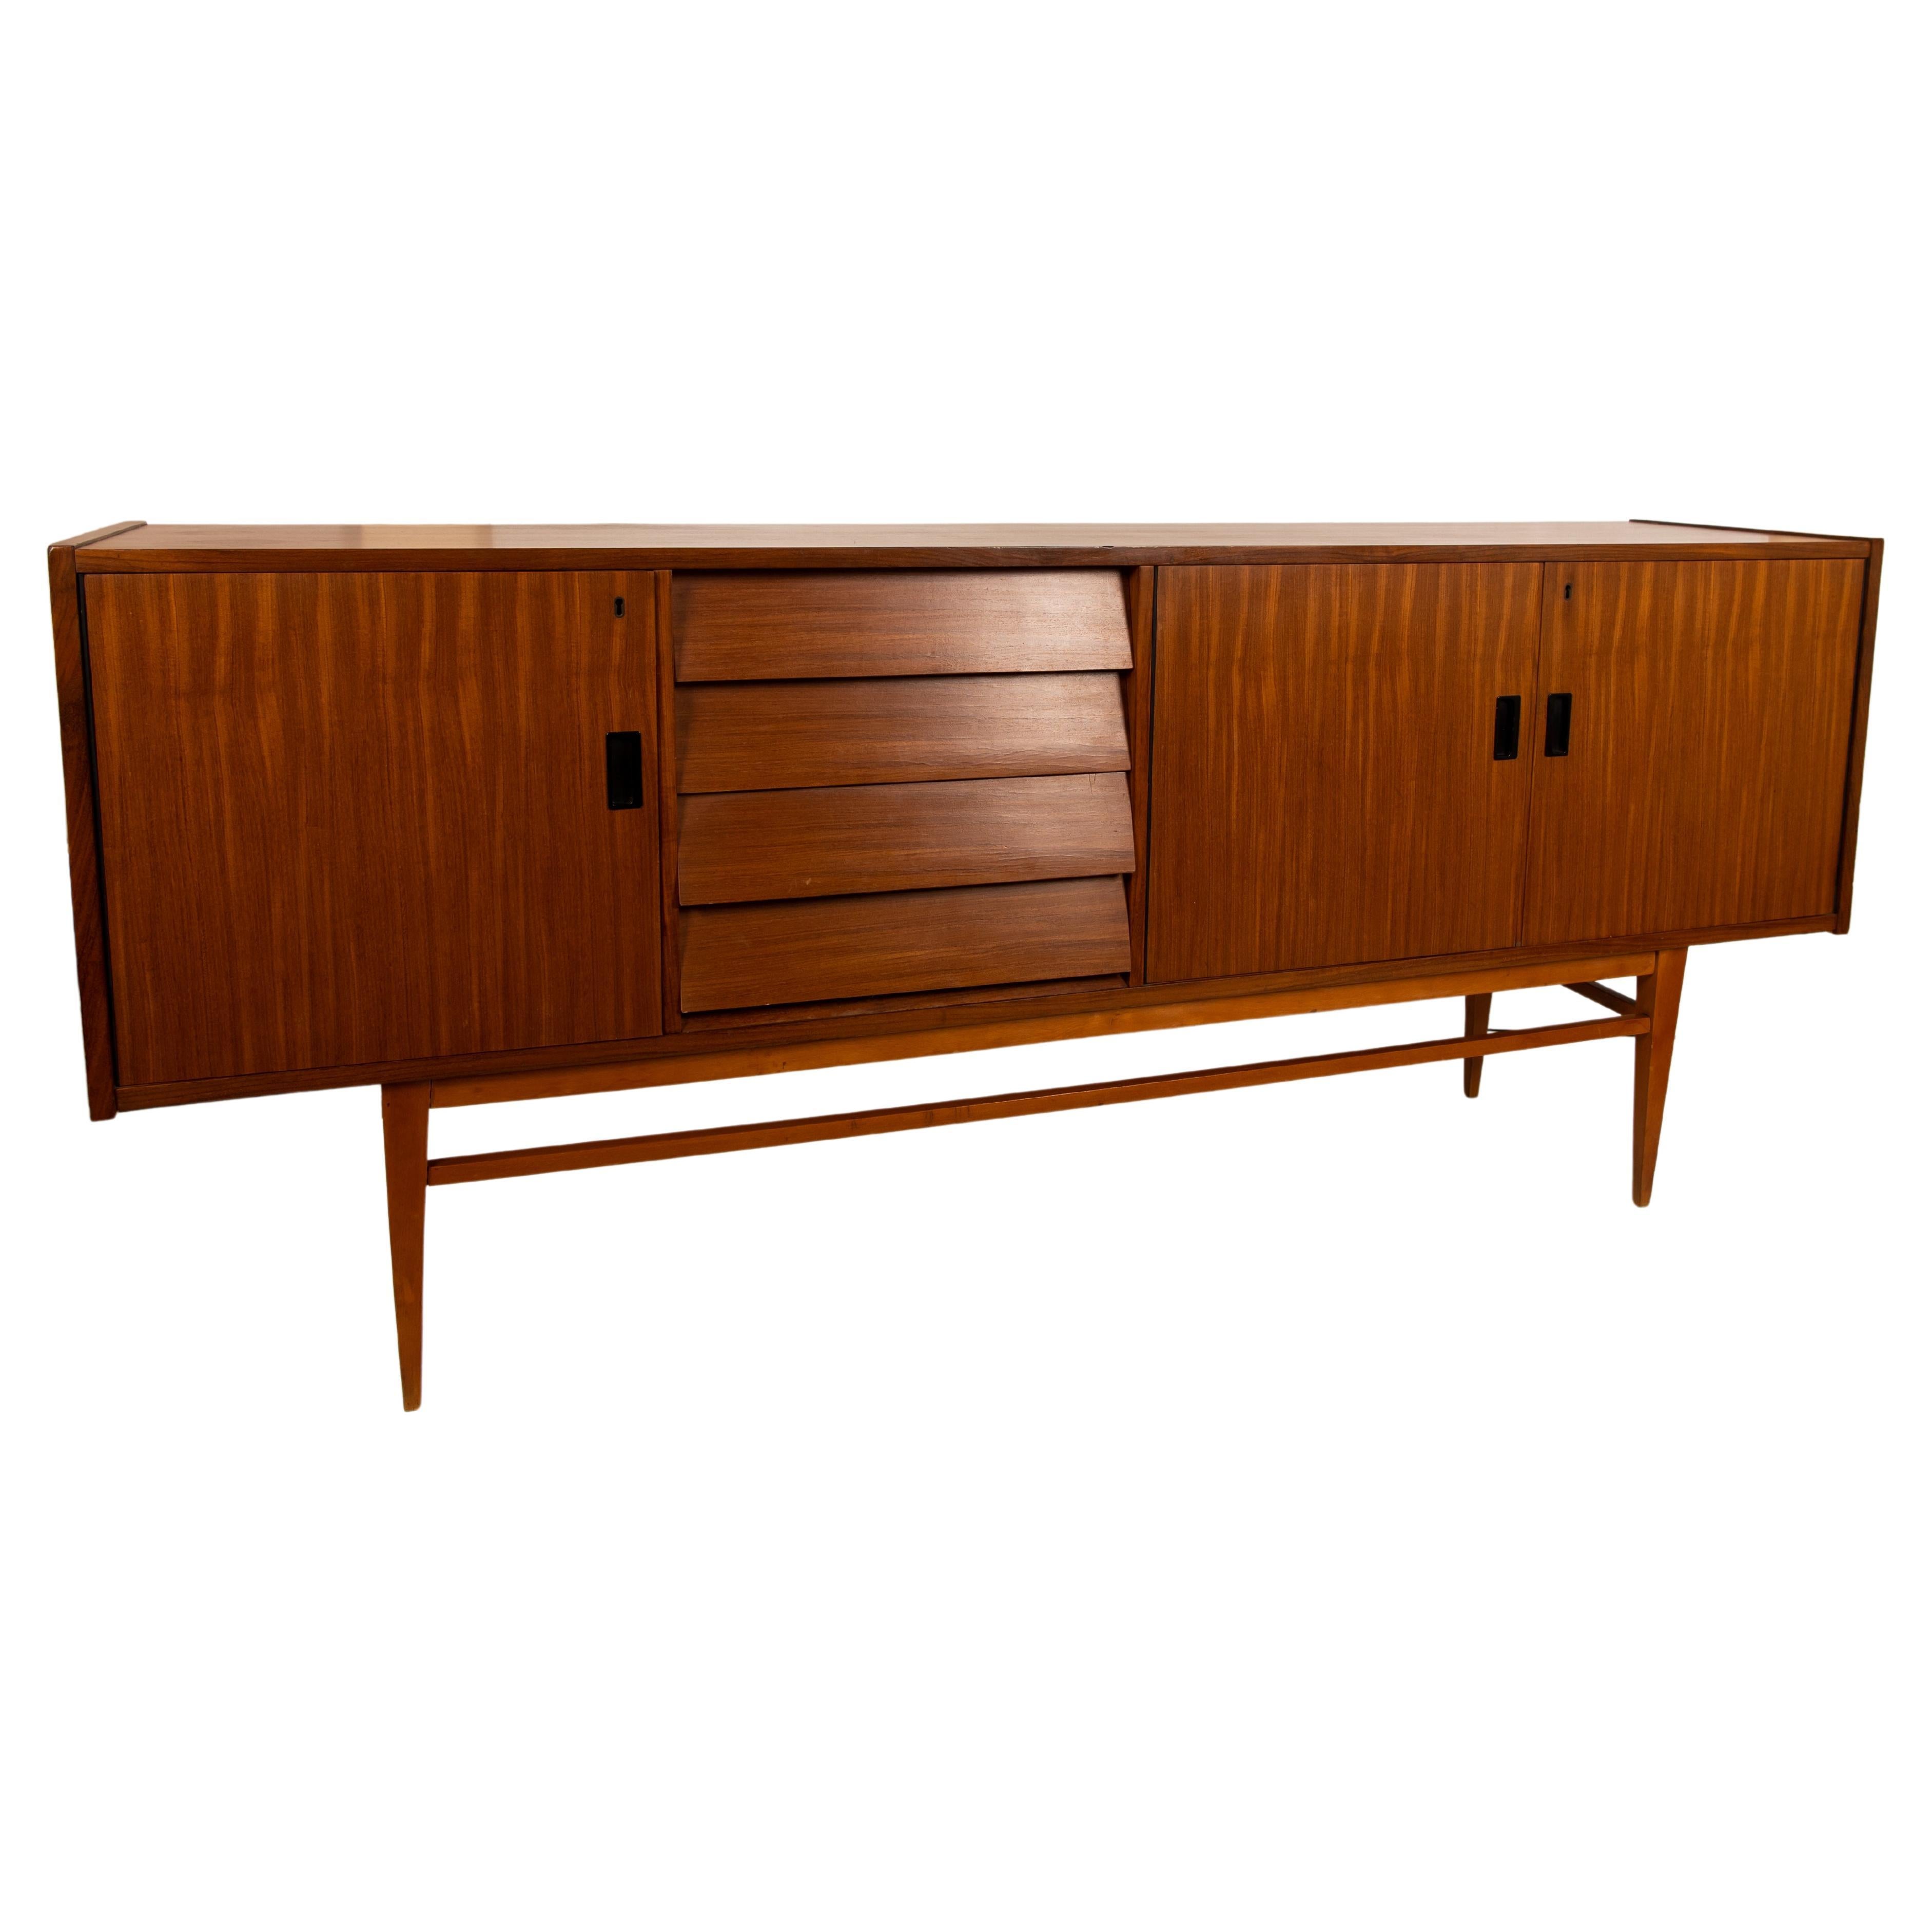 A beautiful 1960s long sideboard (200 cm width). Venereed in teak with solid wood feet and structure. Four refined wood drawers. Item has been restored and it is in really good conditions. Only few signs of time on the top.